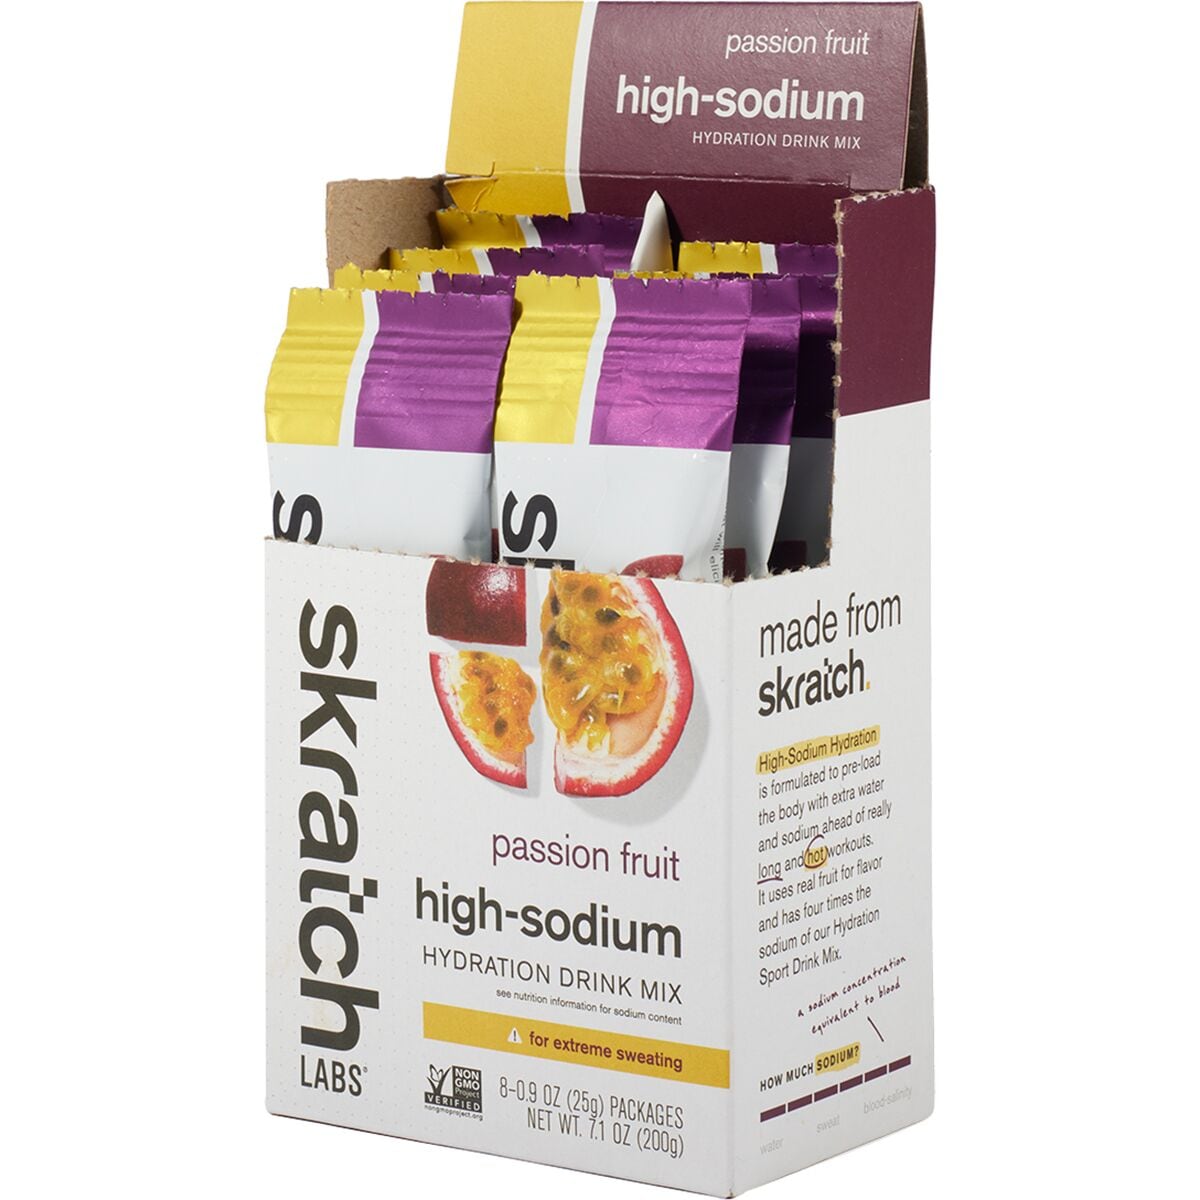 Skratch Labs High-Sodium Hydration Drink Mix - 8-Pack Passion Fruit, 8 Pack